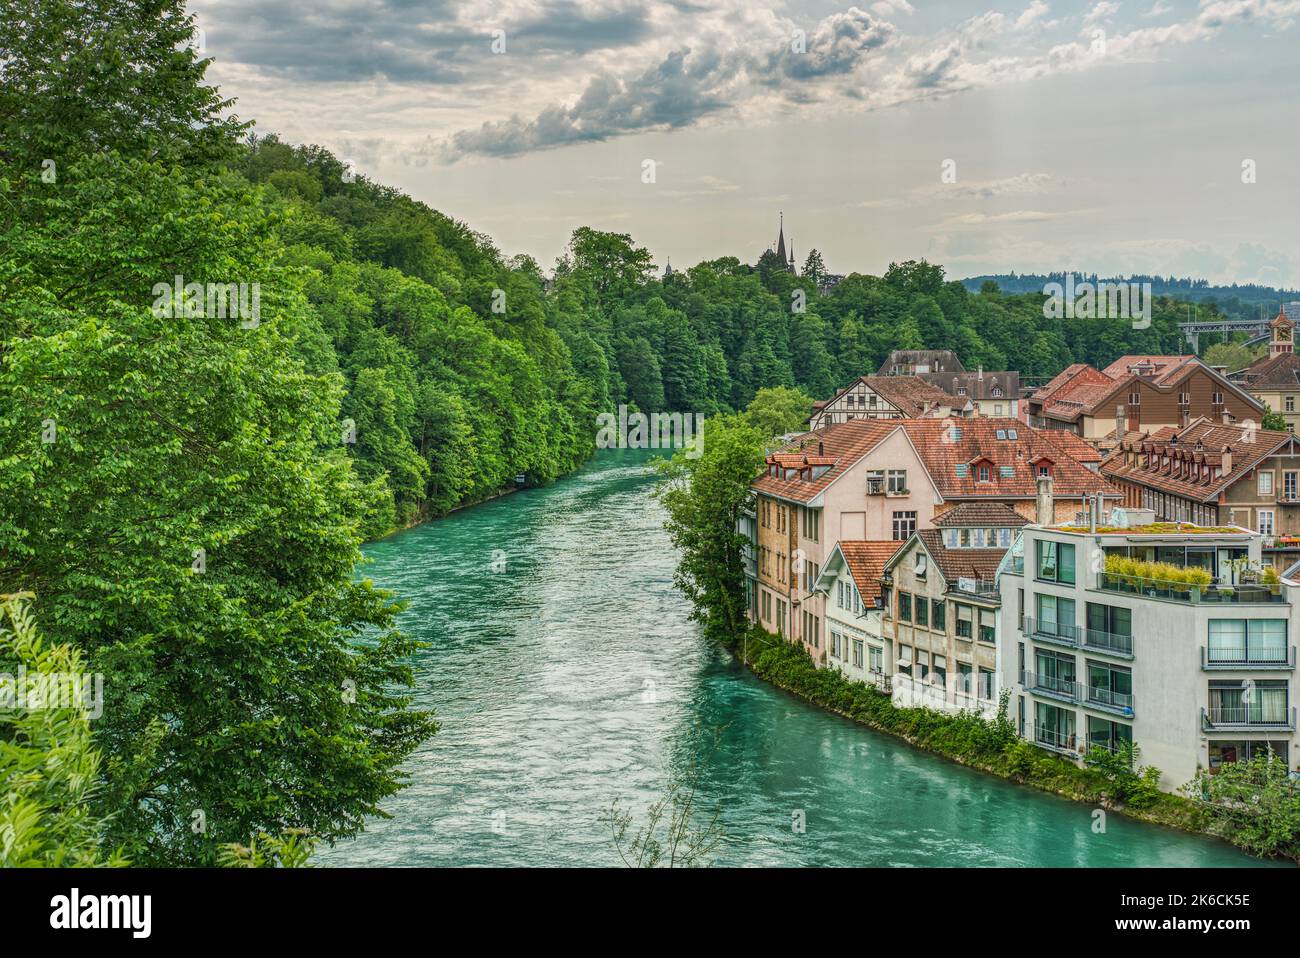 Aerial view of the clear River Aare in Bern, Switzerland with lush forest on one bank, typical Swiss houses on the other side shows a relaxed lifestyl Stock Photo